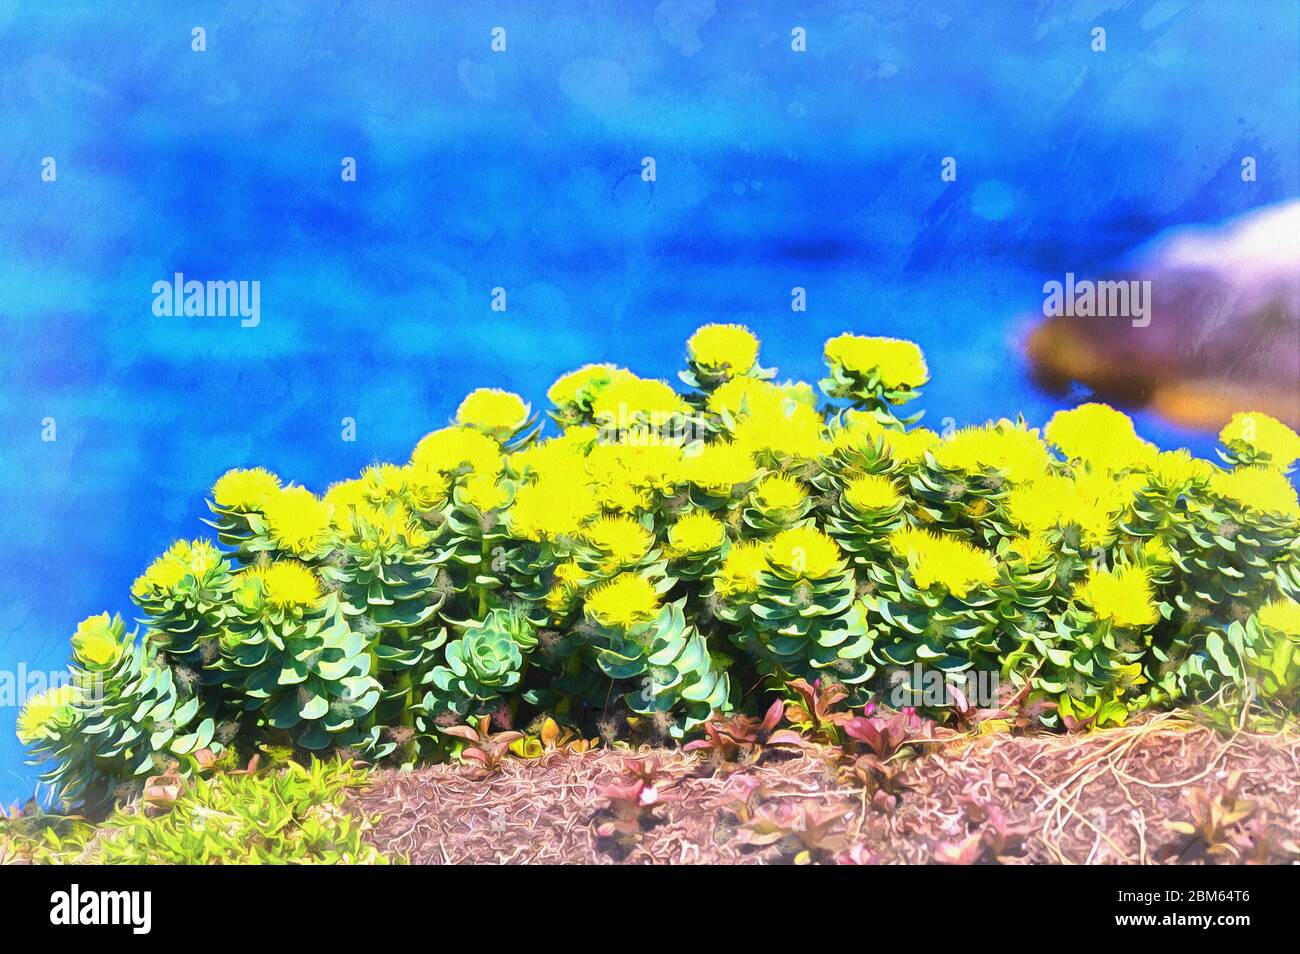 Arctic flowers close up tundra view colorful painting looks like picture Stock Photo